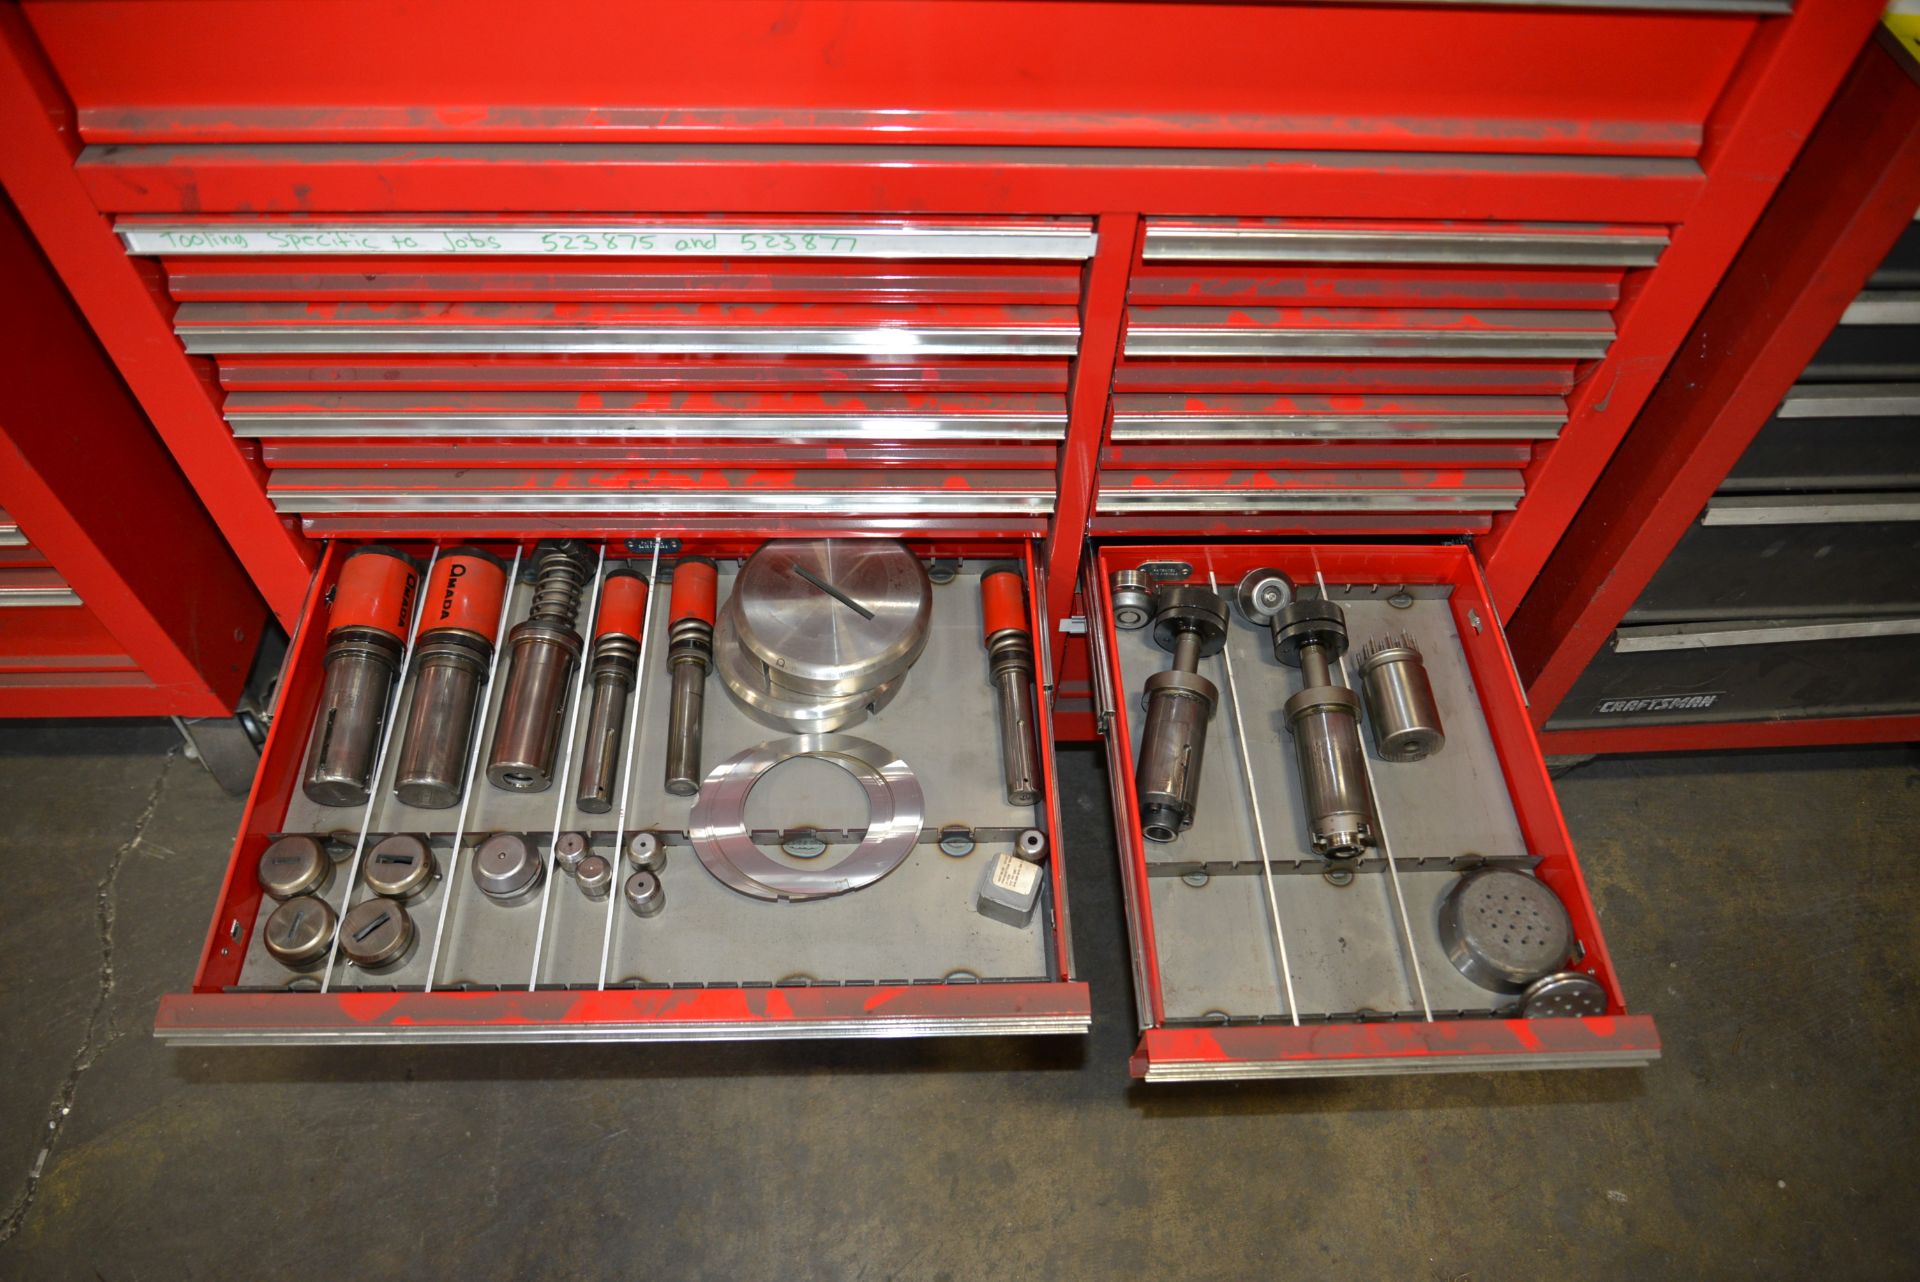 US GENERAL TOOL CHEST FULL OF AMADA TOOLING - Image 7 of 8